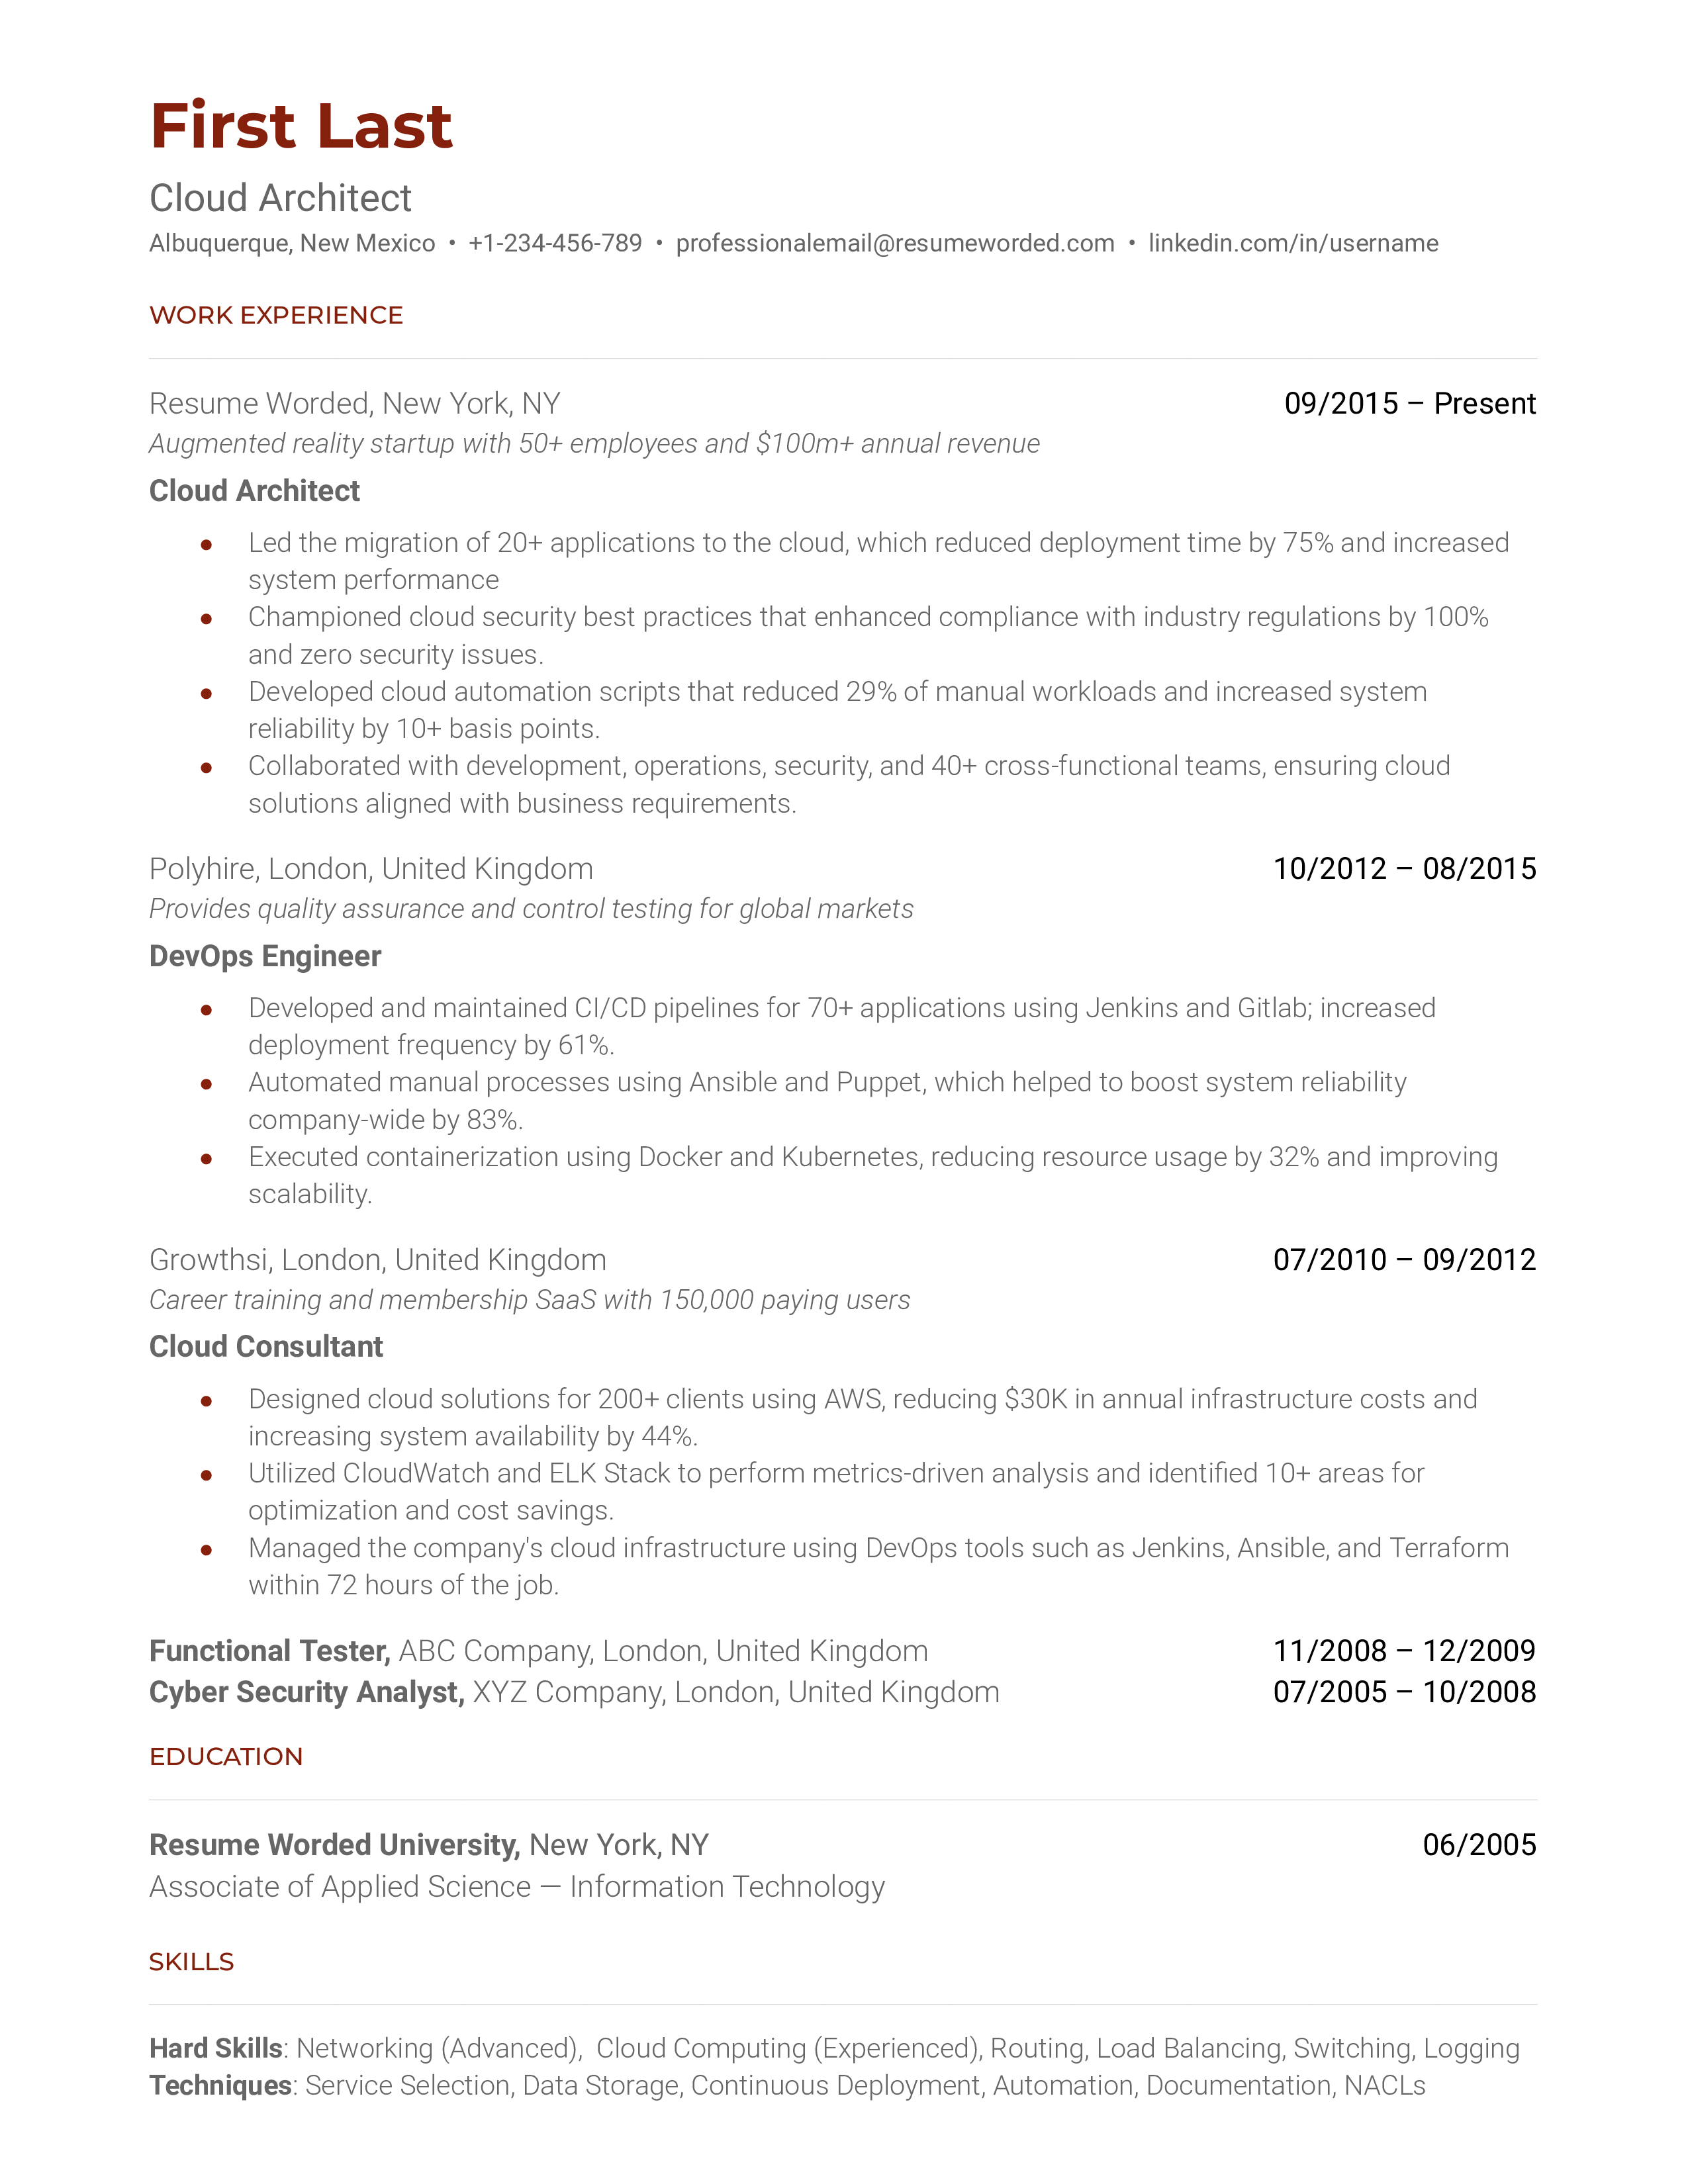 A Cloud Architect CV showcasing business and technical skills